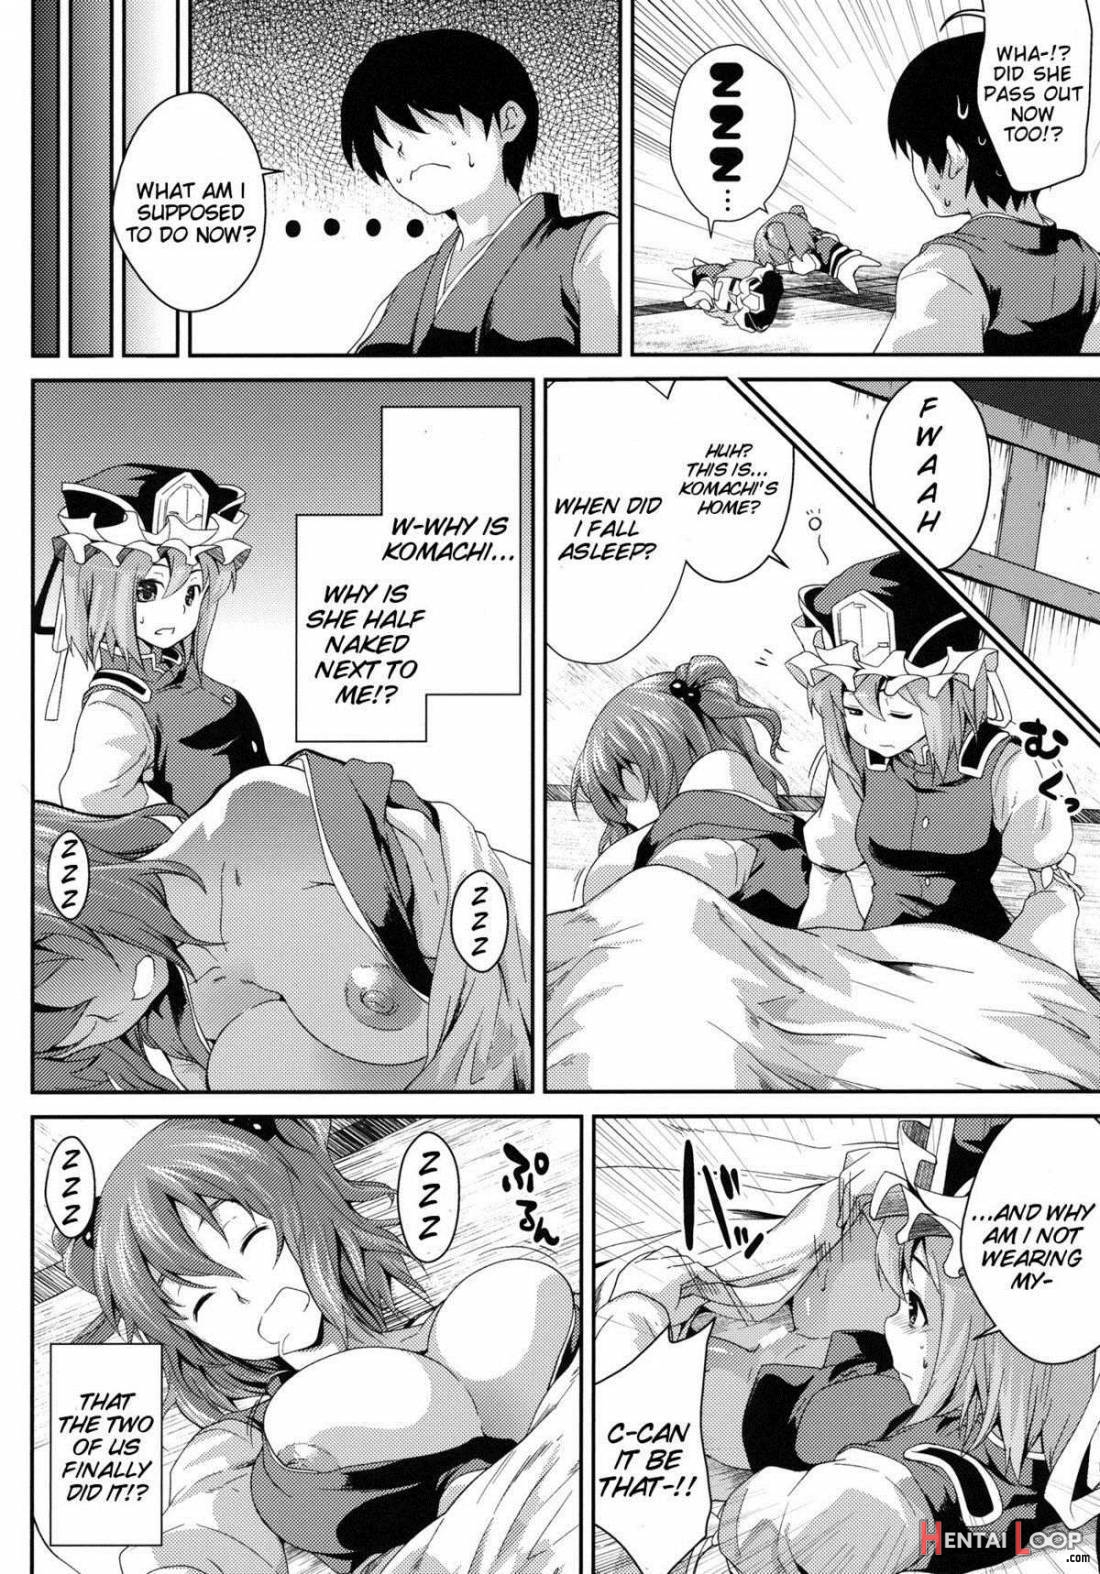 Together With Komachi 3 page 23